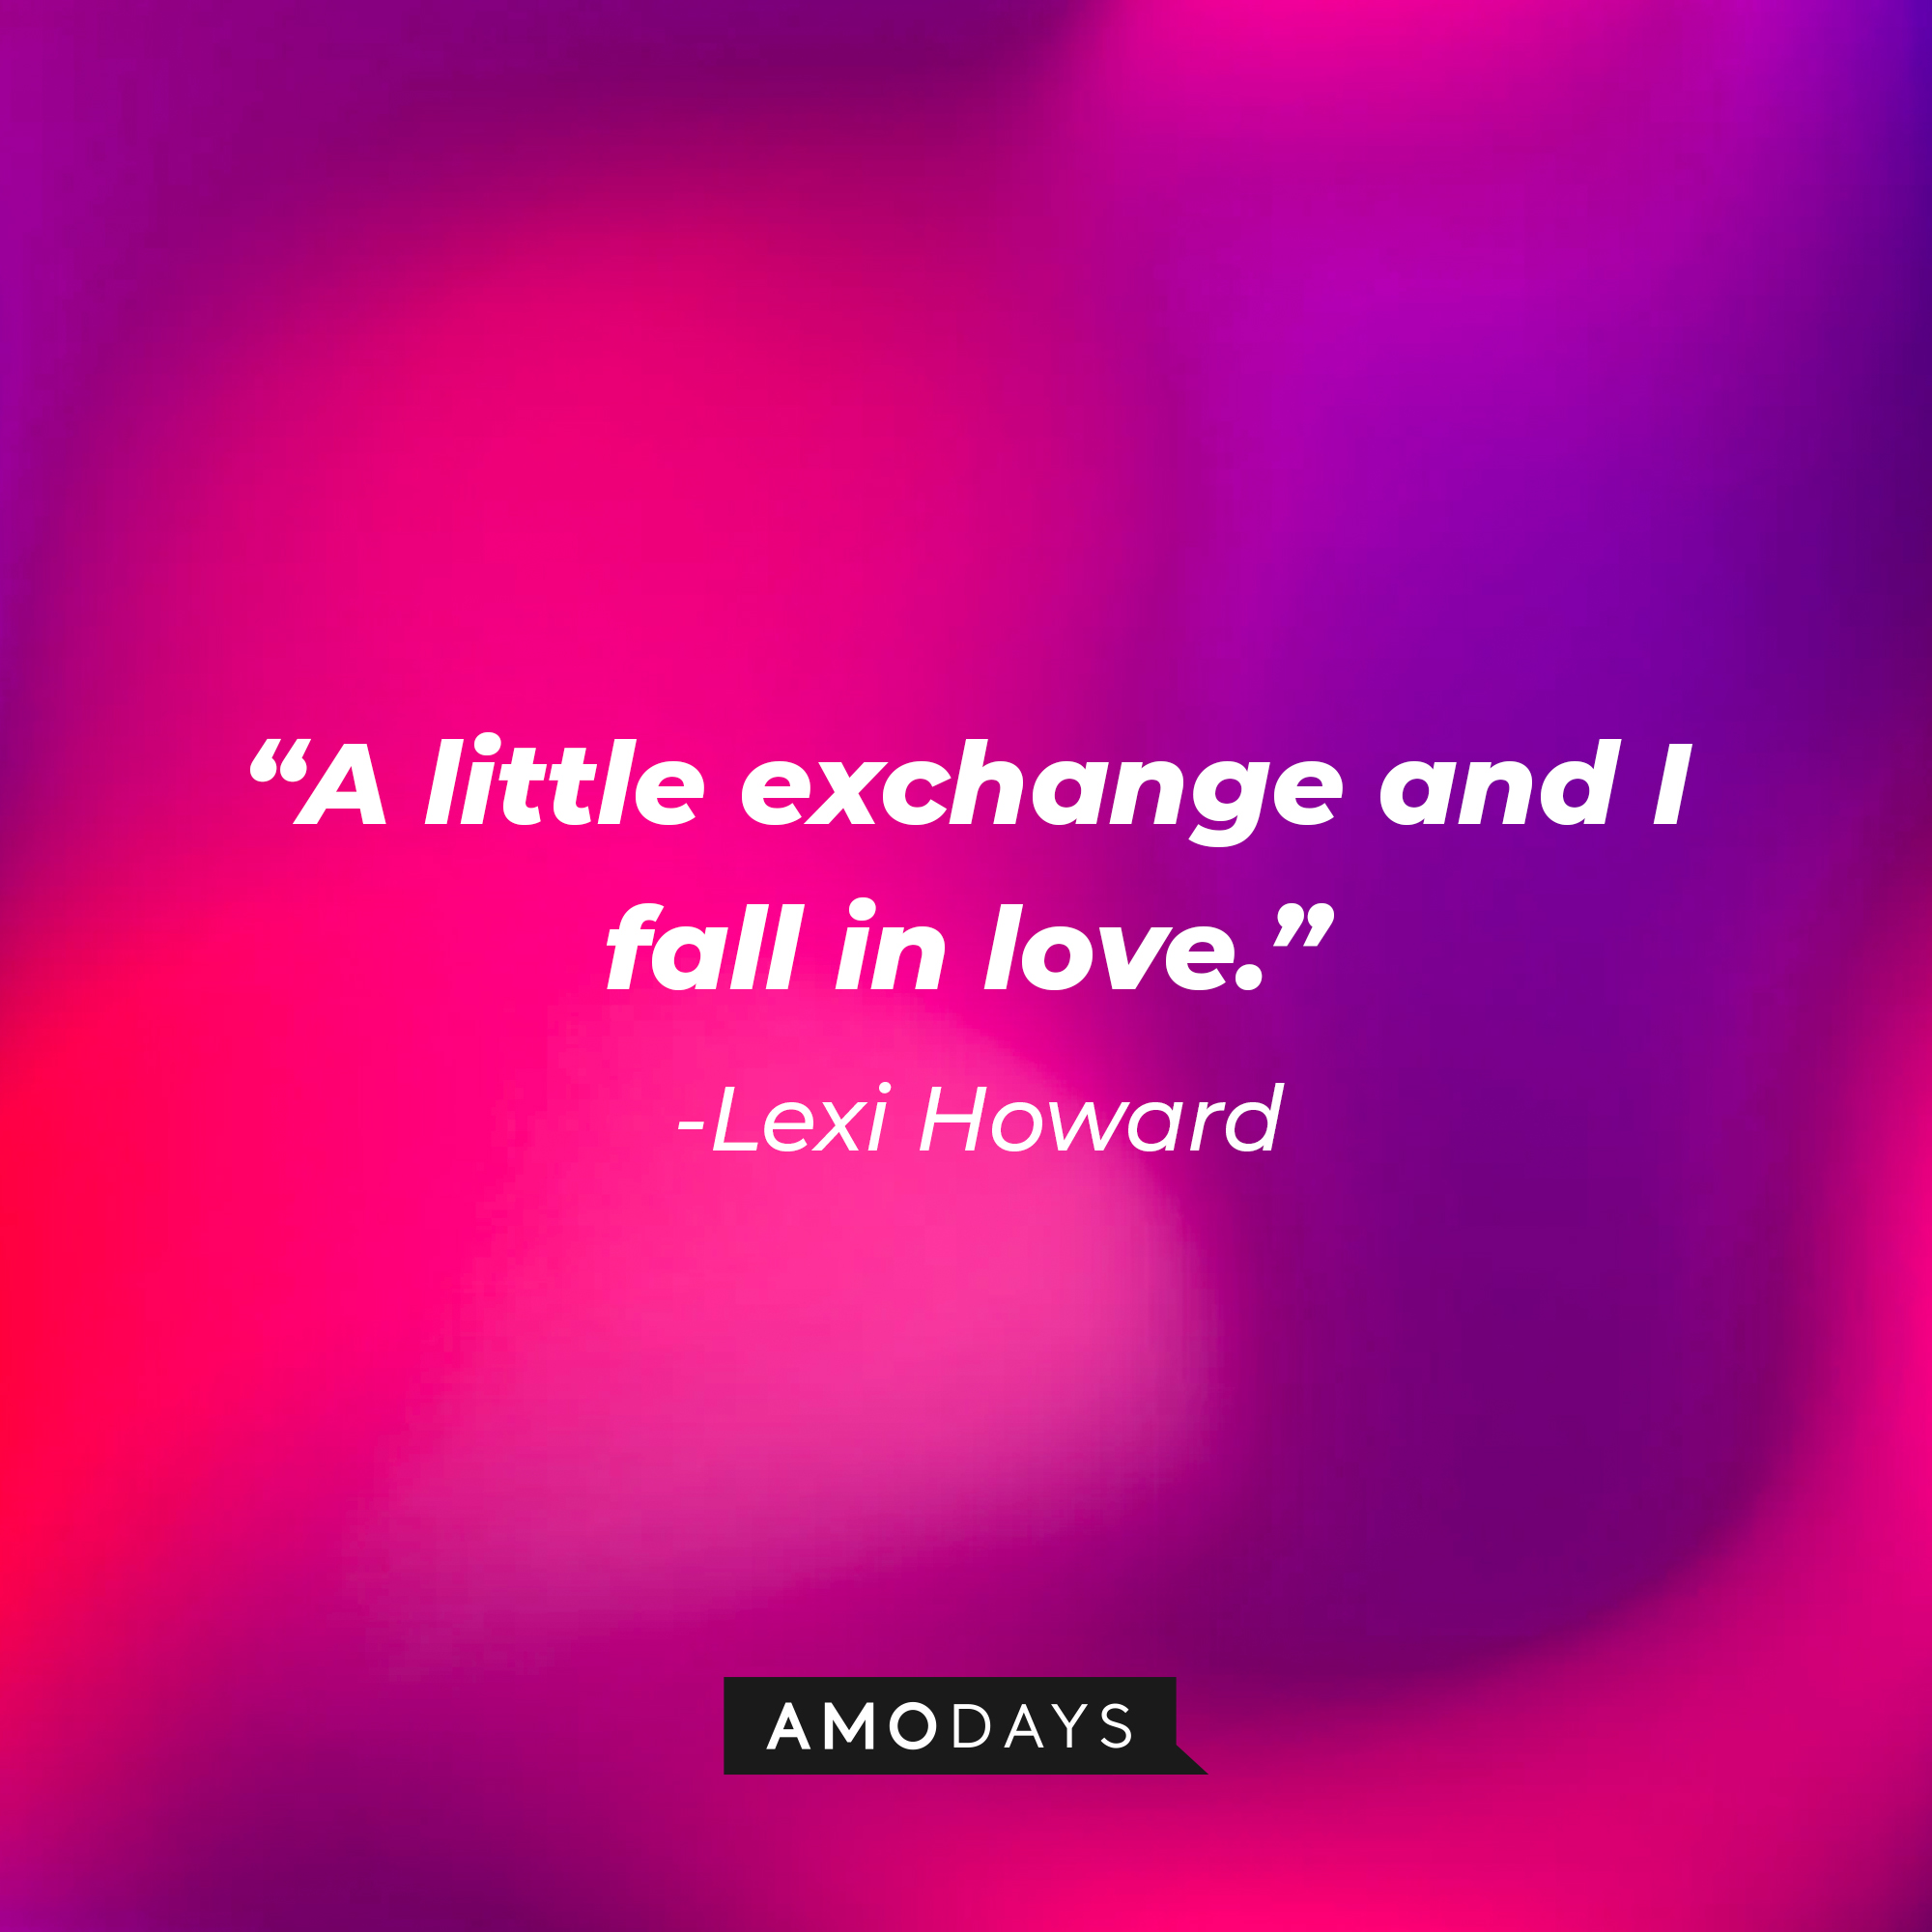 Lexi Howard’s quote: “A little exchange and I fall in love.” | Source: AmoDays